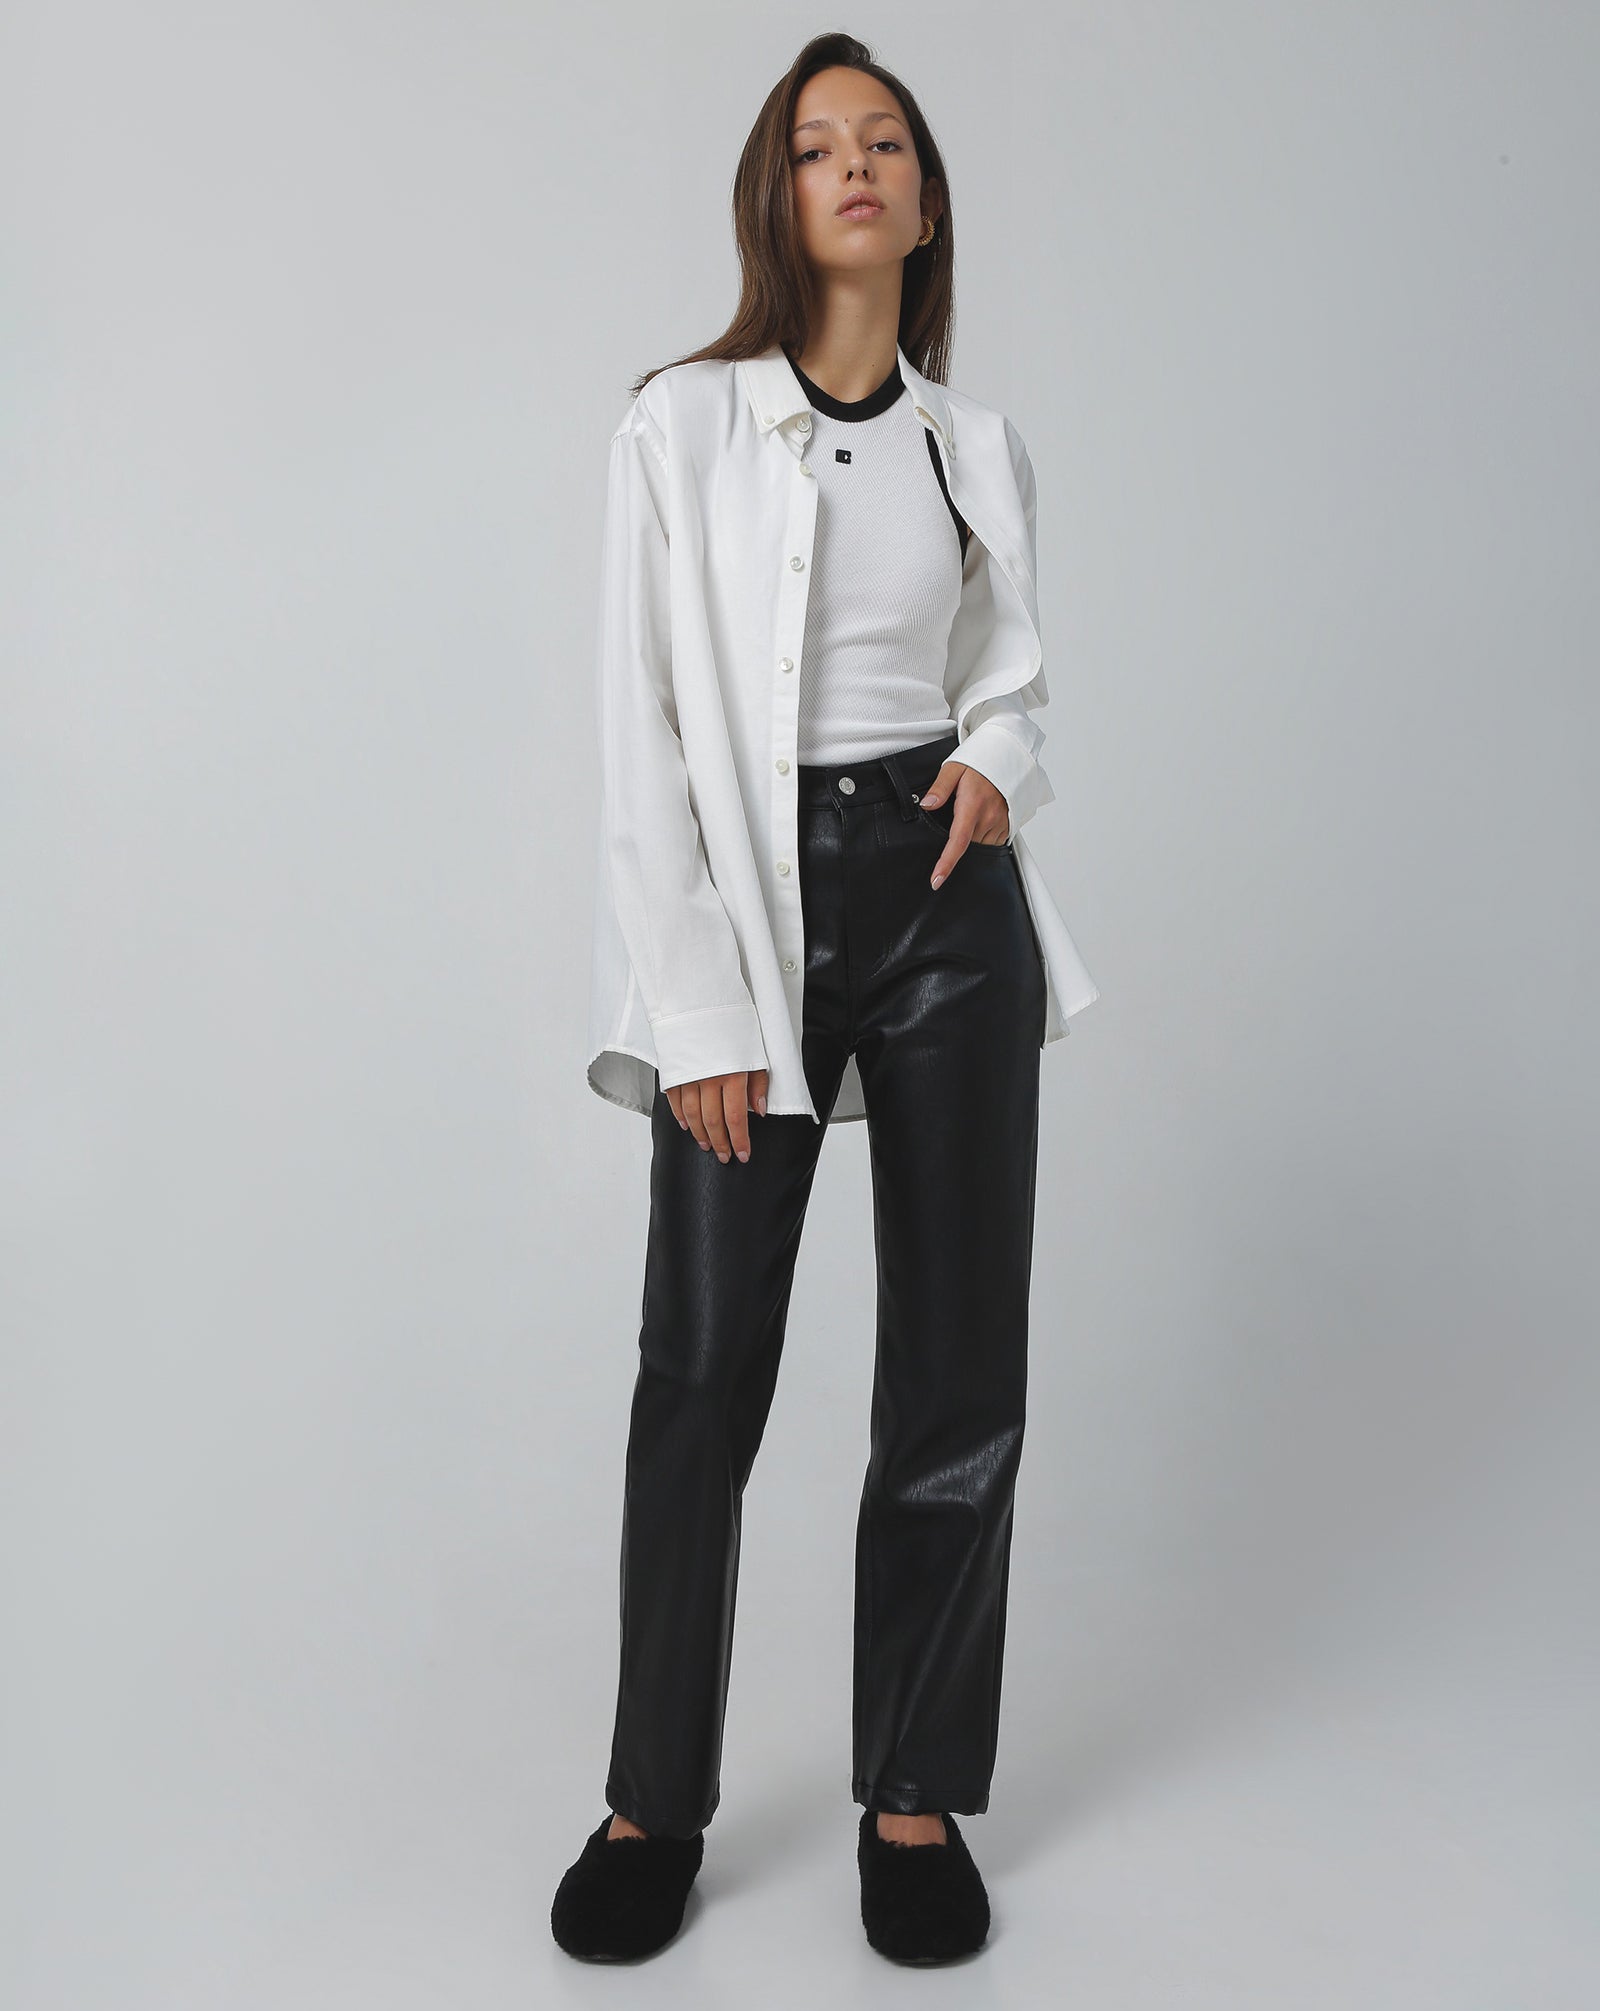 Leather jeans from Dunst